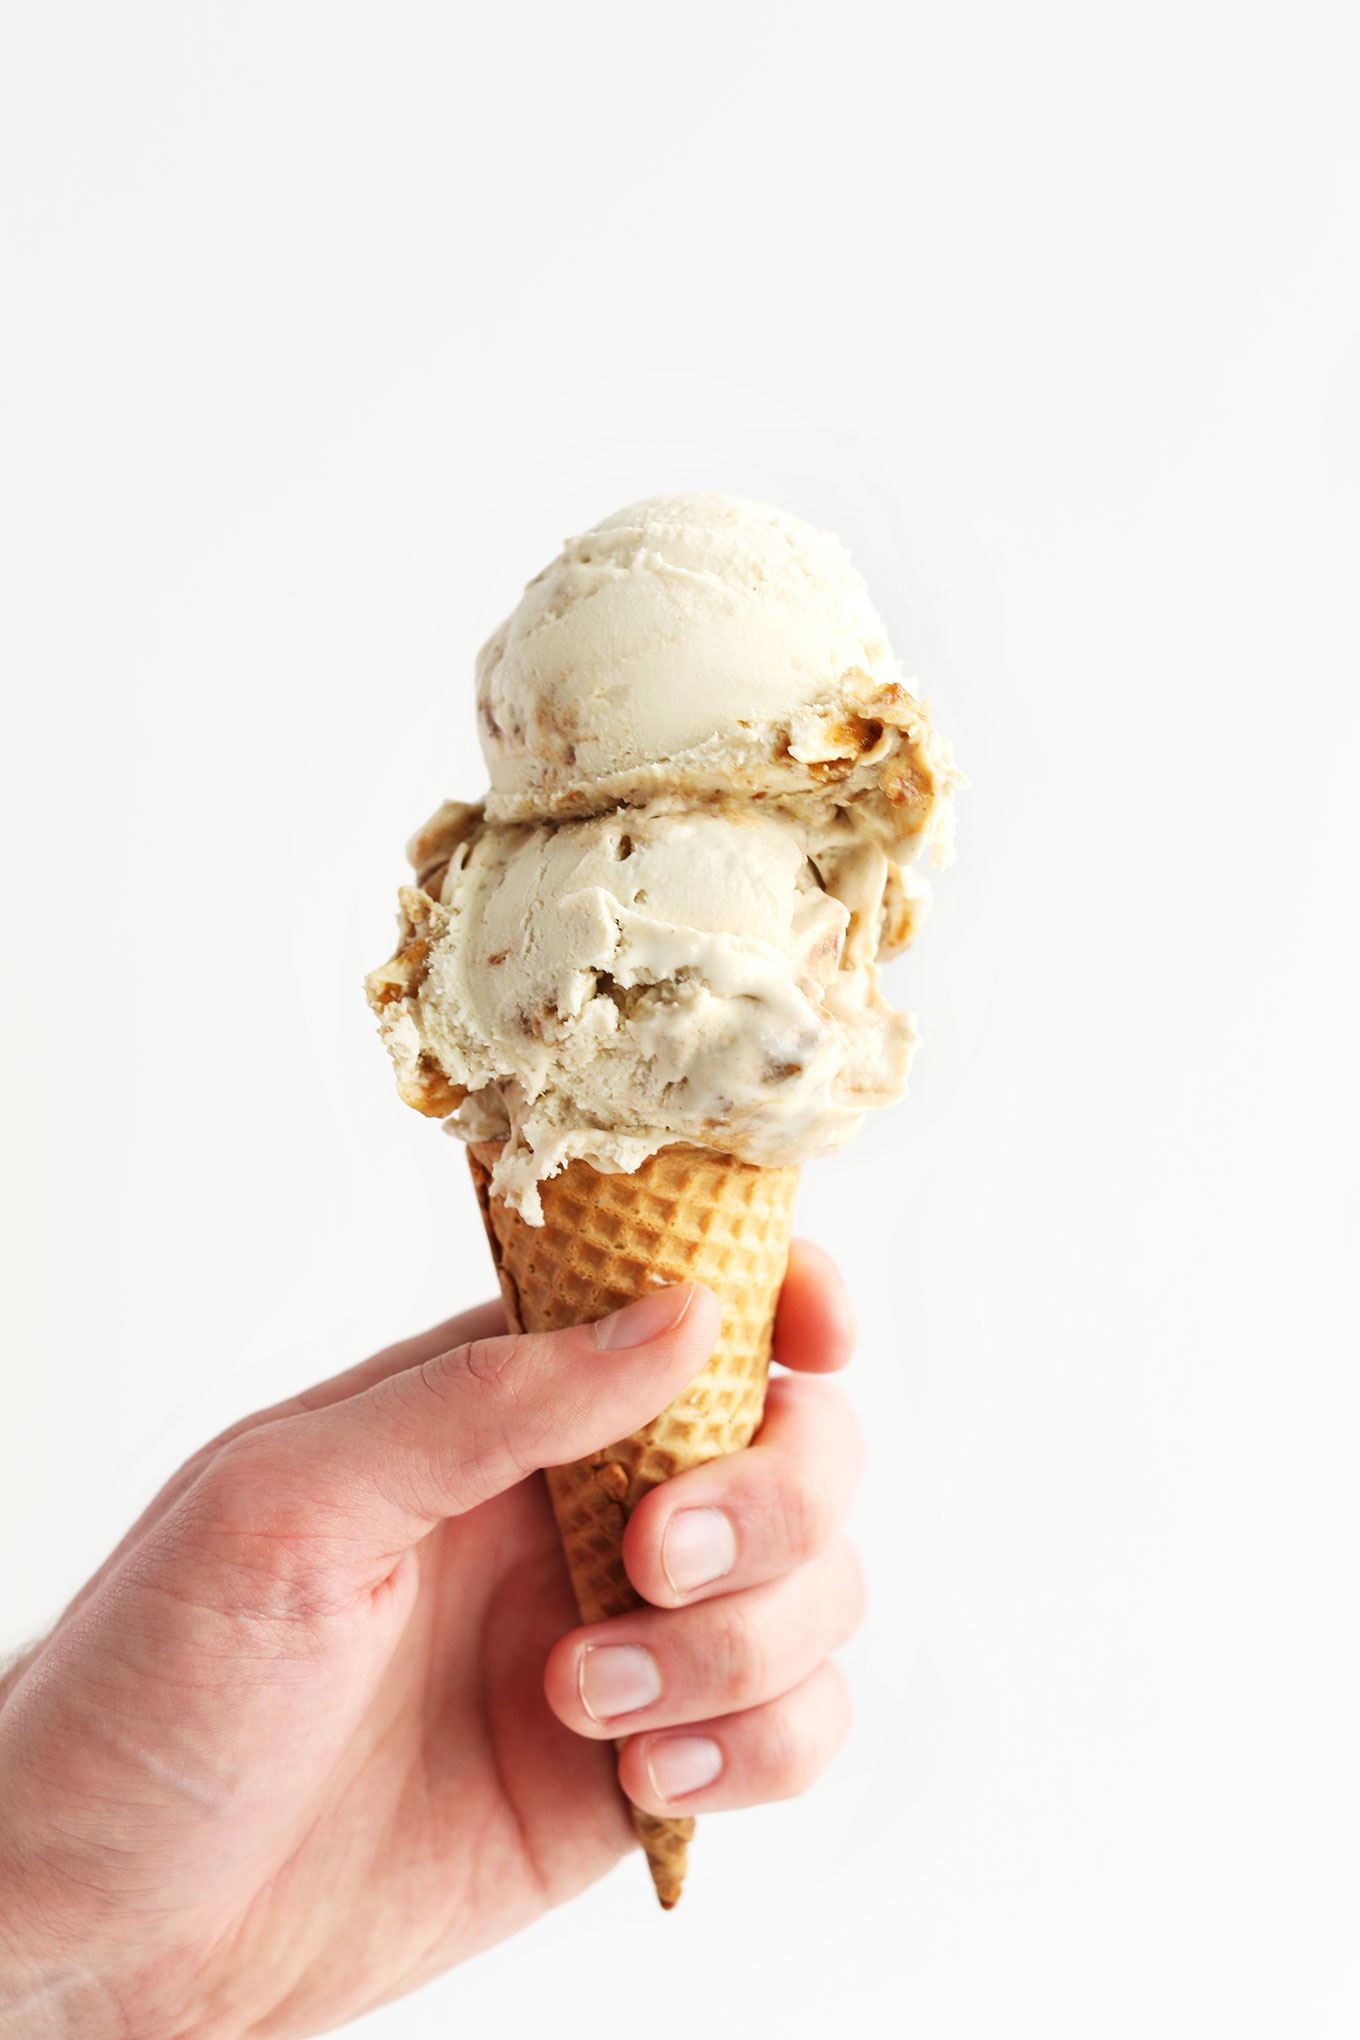 Scoops of our Vegan Coconut Caramel Ice Cream on a gluten-free cone